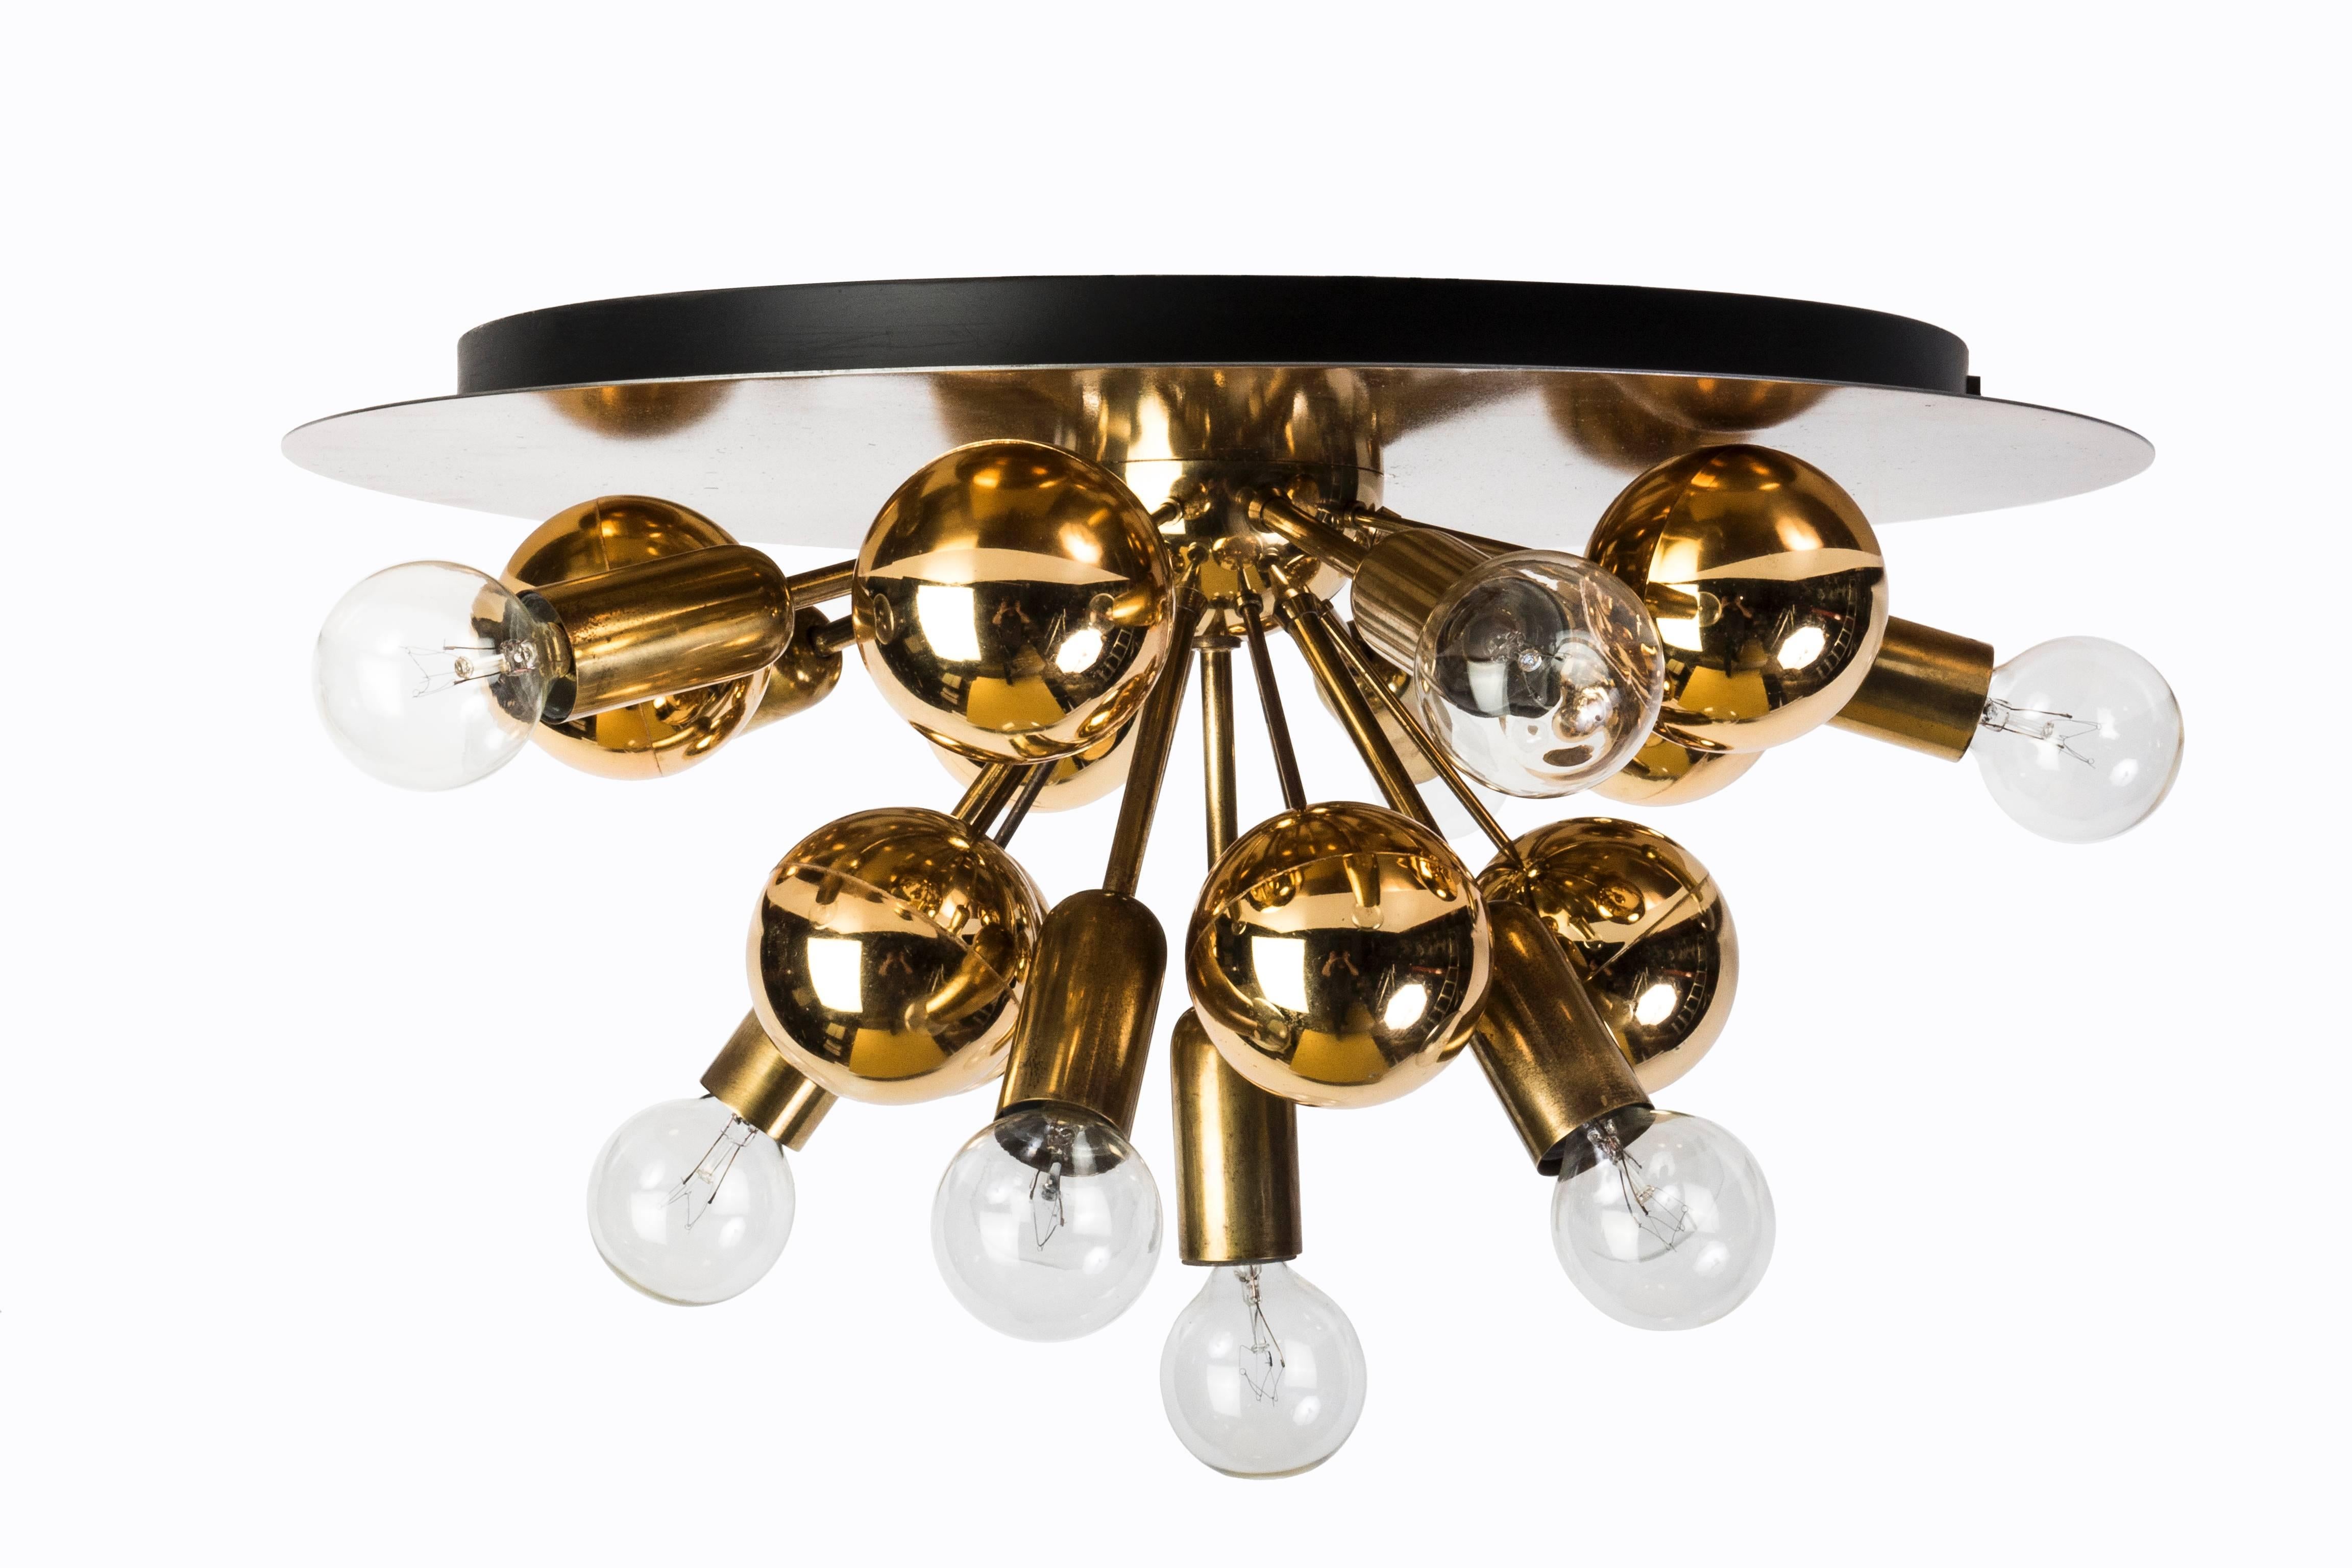 This exquisite Mid-Century Modern Sputnik flush mount or sconce features a brass frame with gold patina and gilt mirrored acrylic bulbs making these pieces absolute eyecatchers.